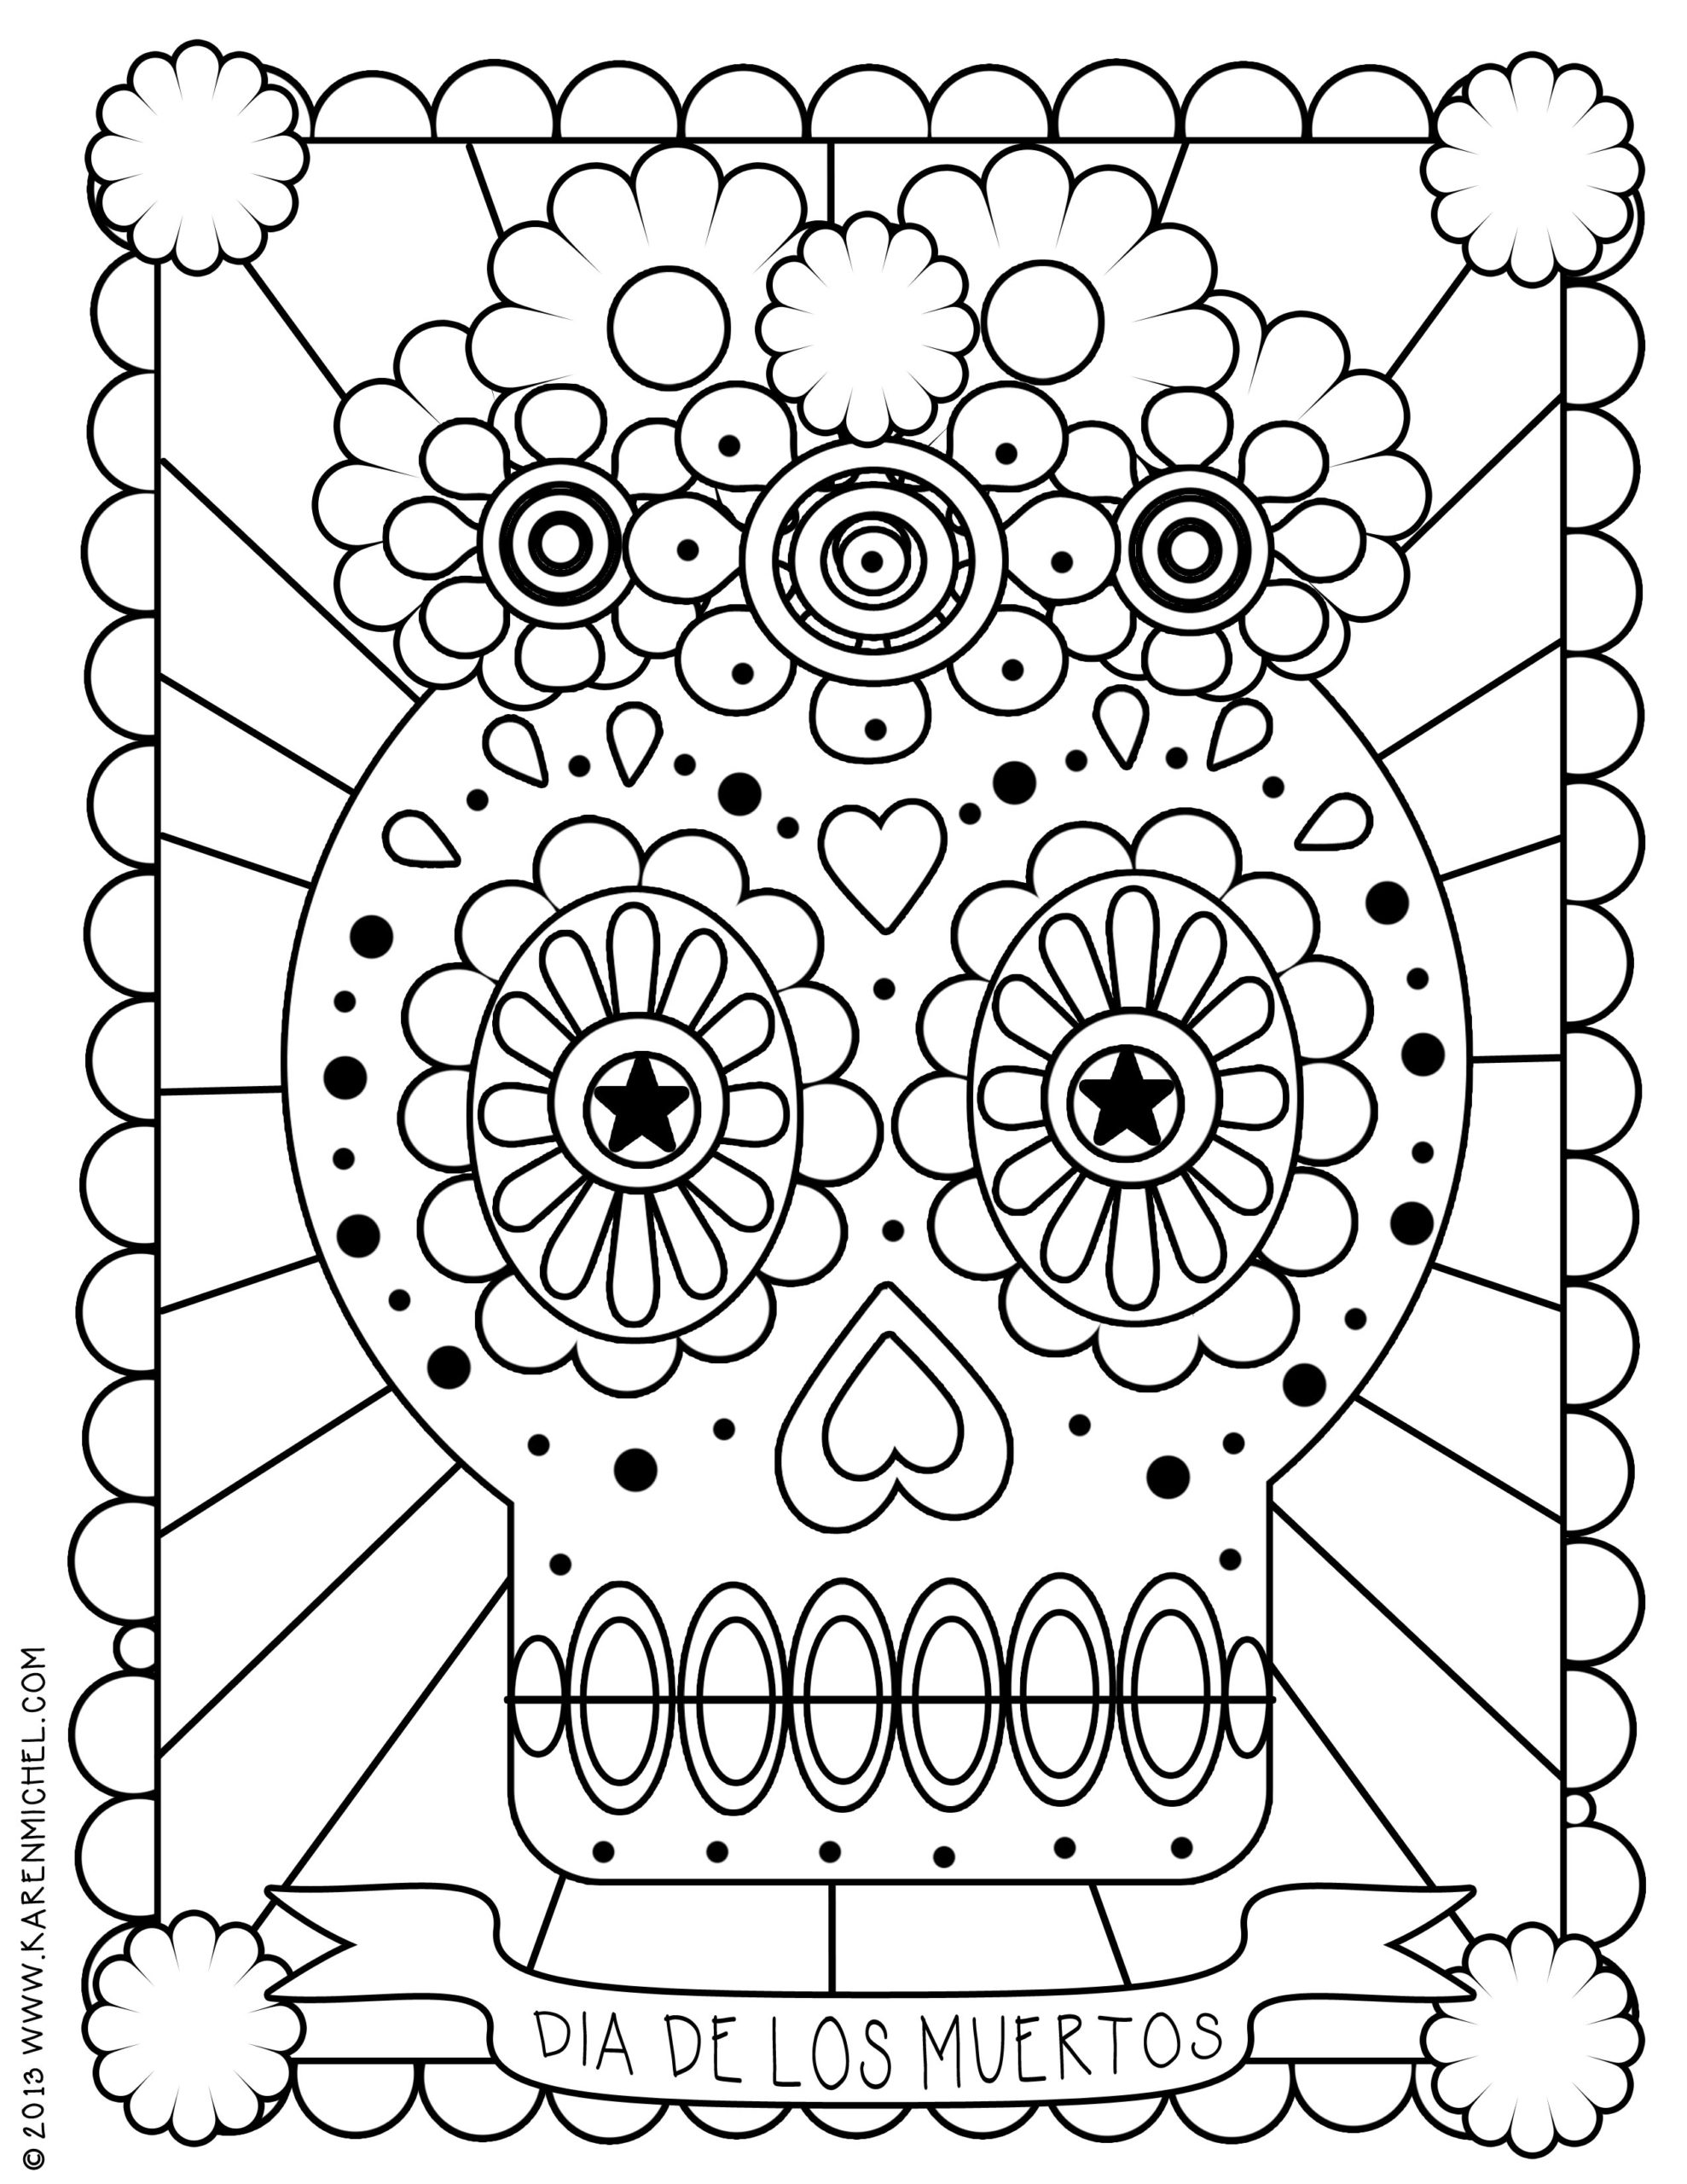 Coloring Pages : Disney Pixar Coco Giant Coloring Book Drawing ...